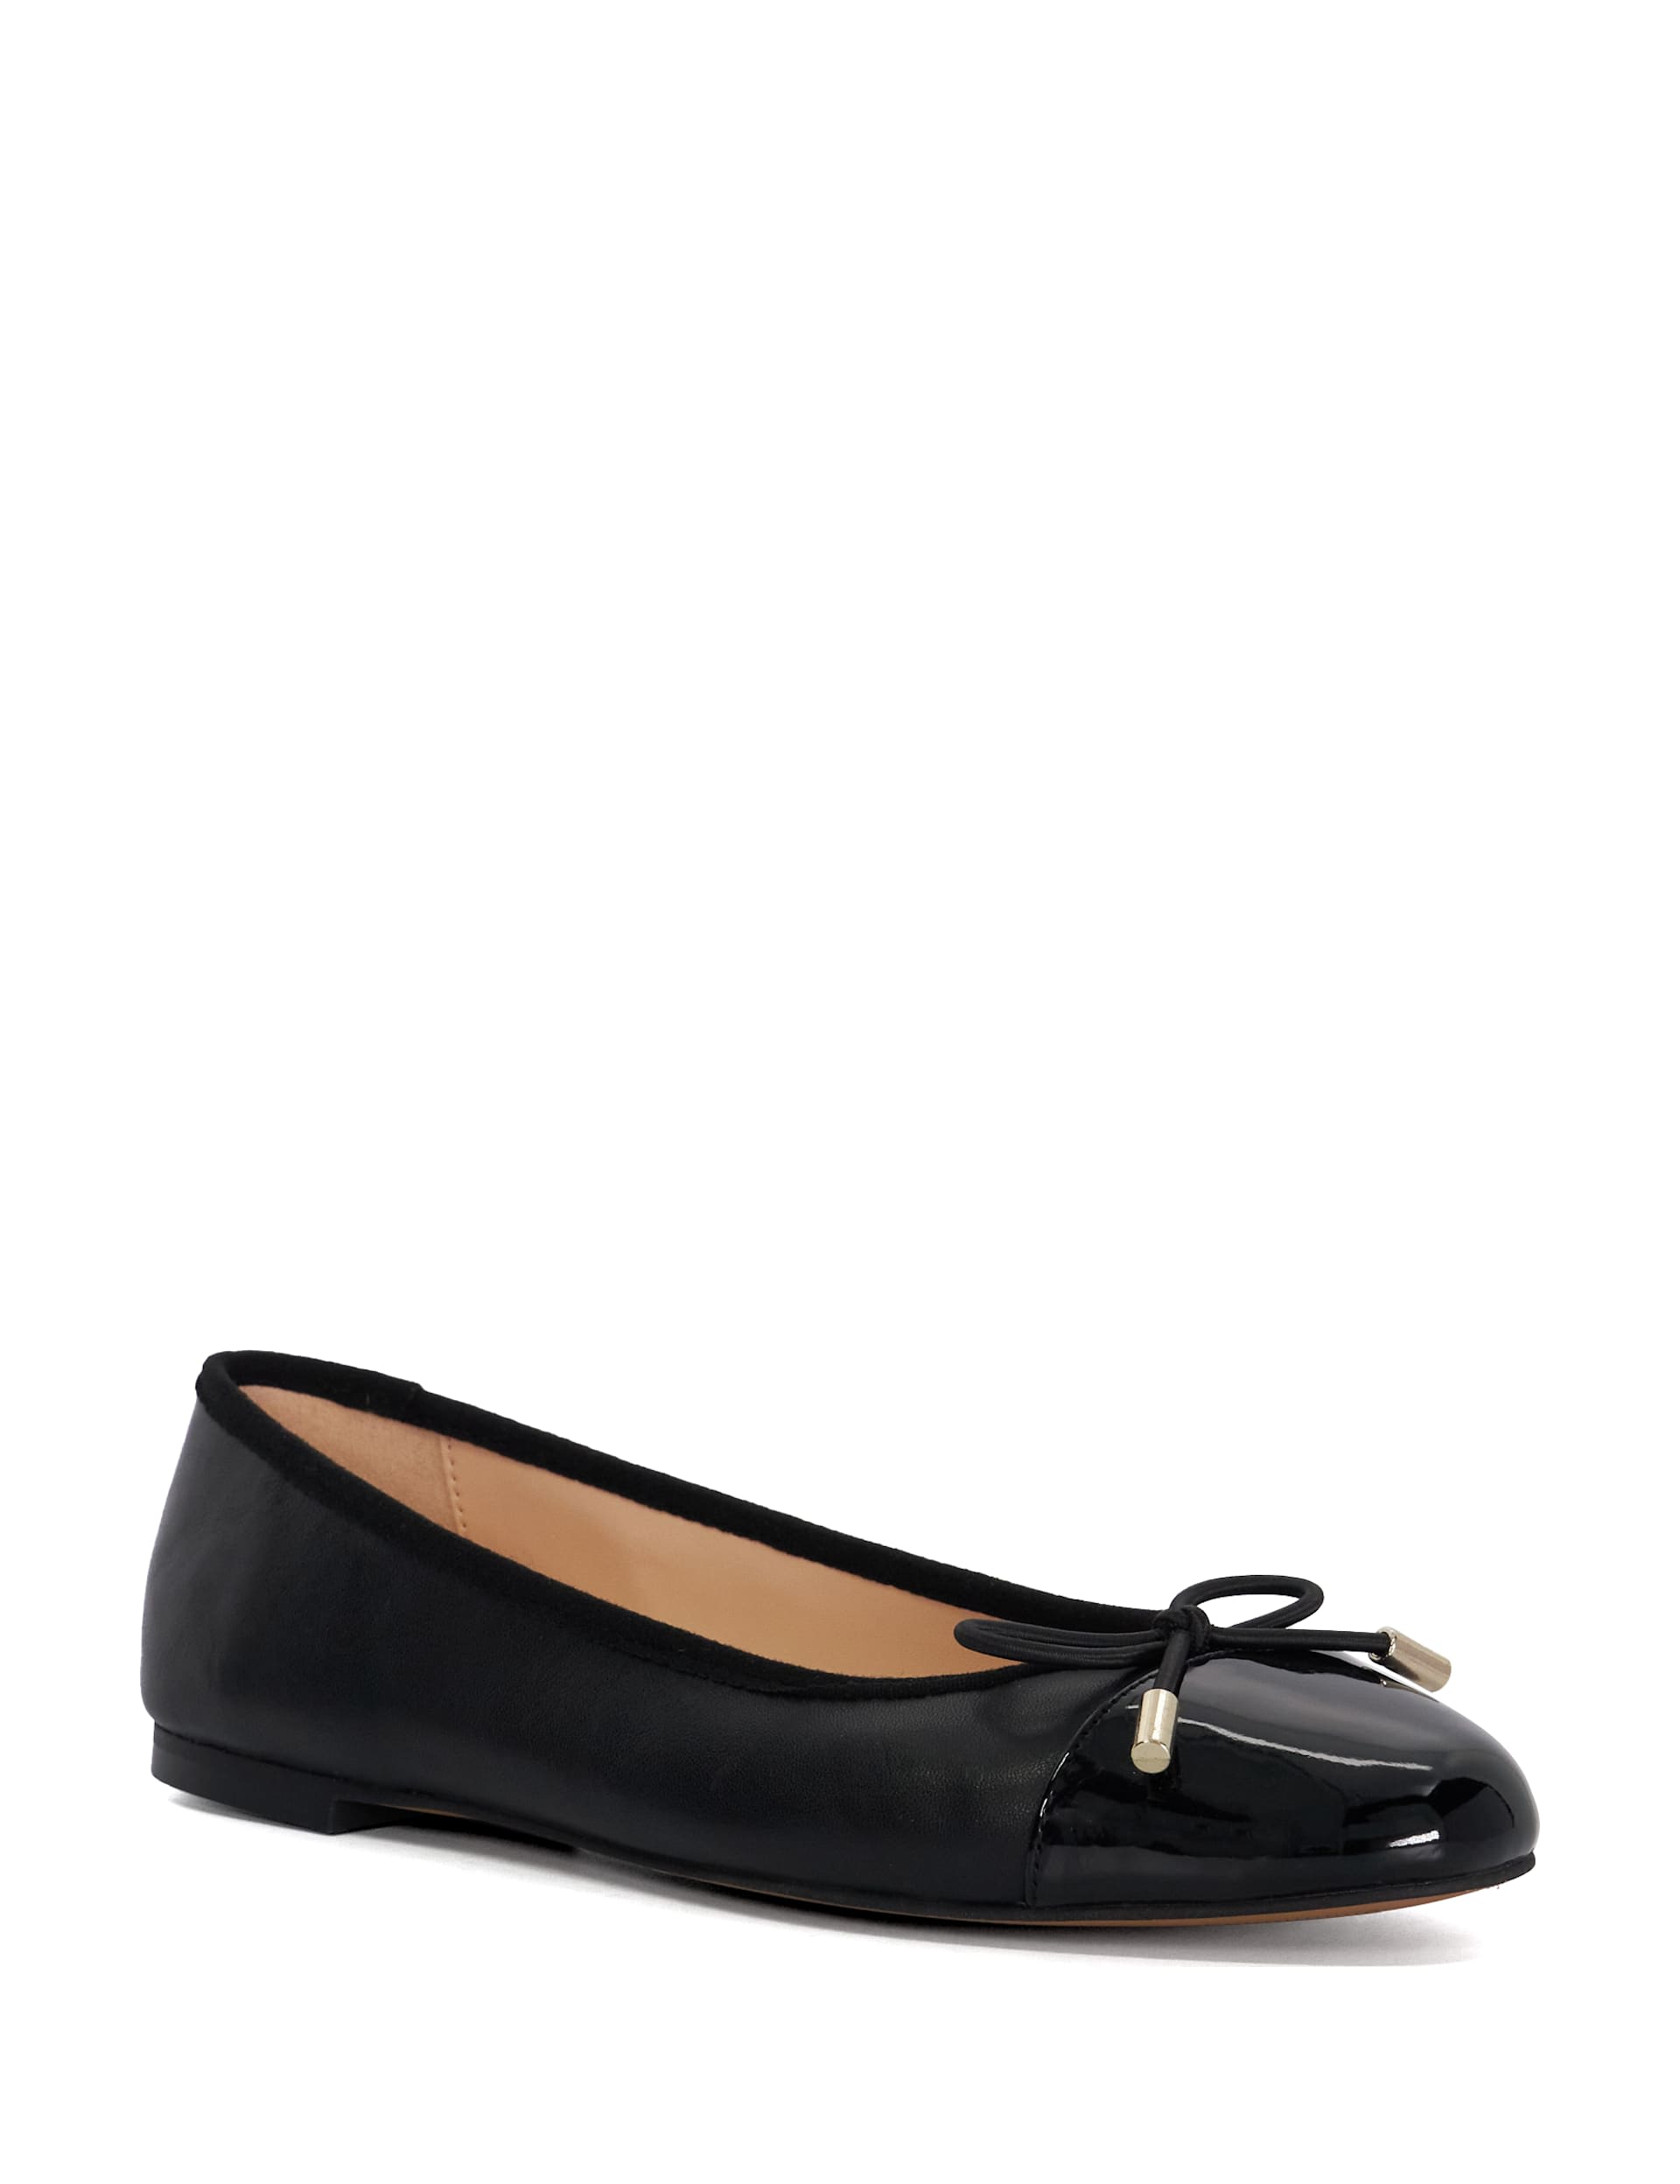 Leather Flat Ballet Pumps 2 of 5